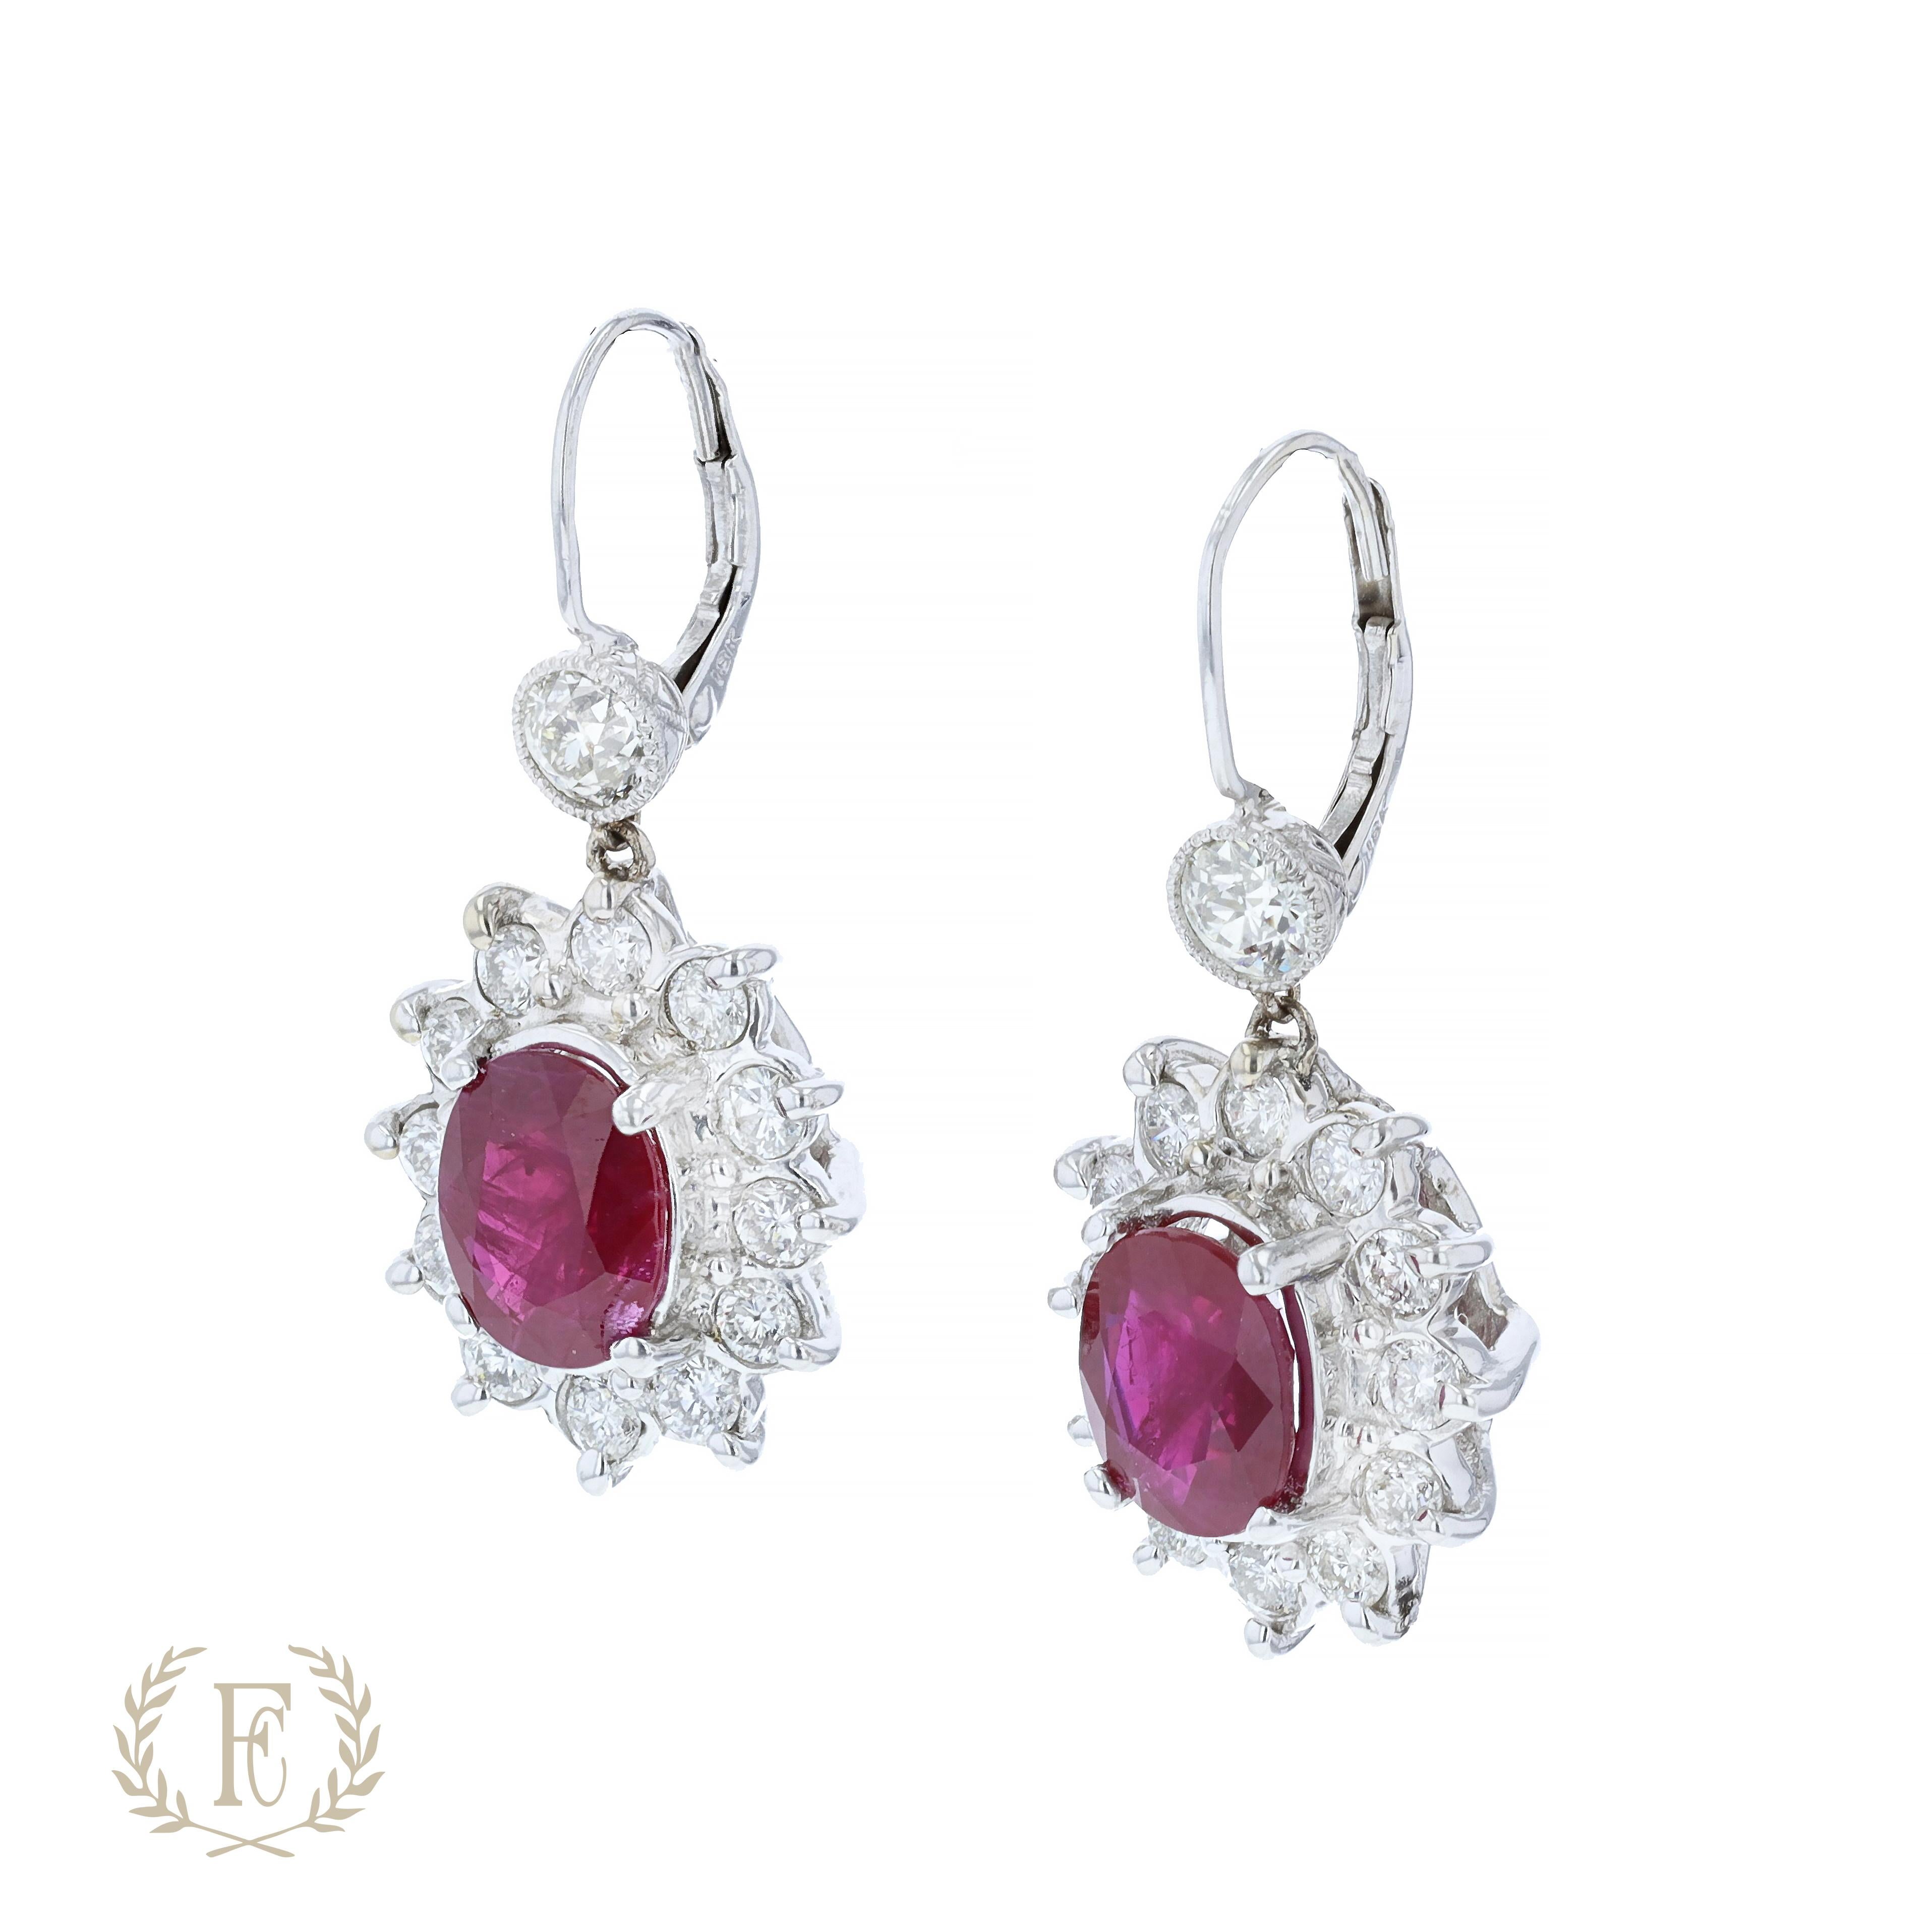 One pair of 18 k white gold and ruby diamond dangle earrings containing 2 oval shaped rubies that weigh 6.20 ctw. The earrings also contain 2 old mine diamonds that weight .75 ctw and 24 round diamonds weighing 3.20 ctw.